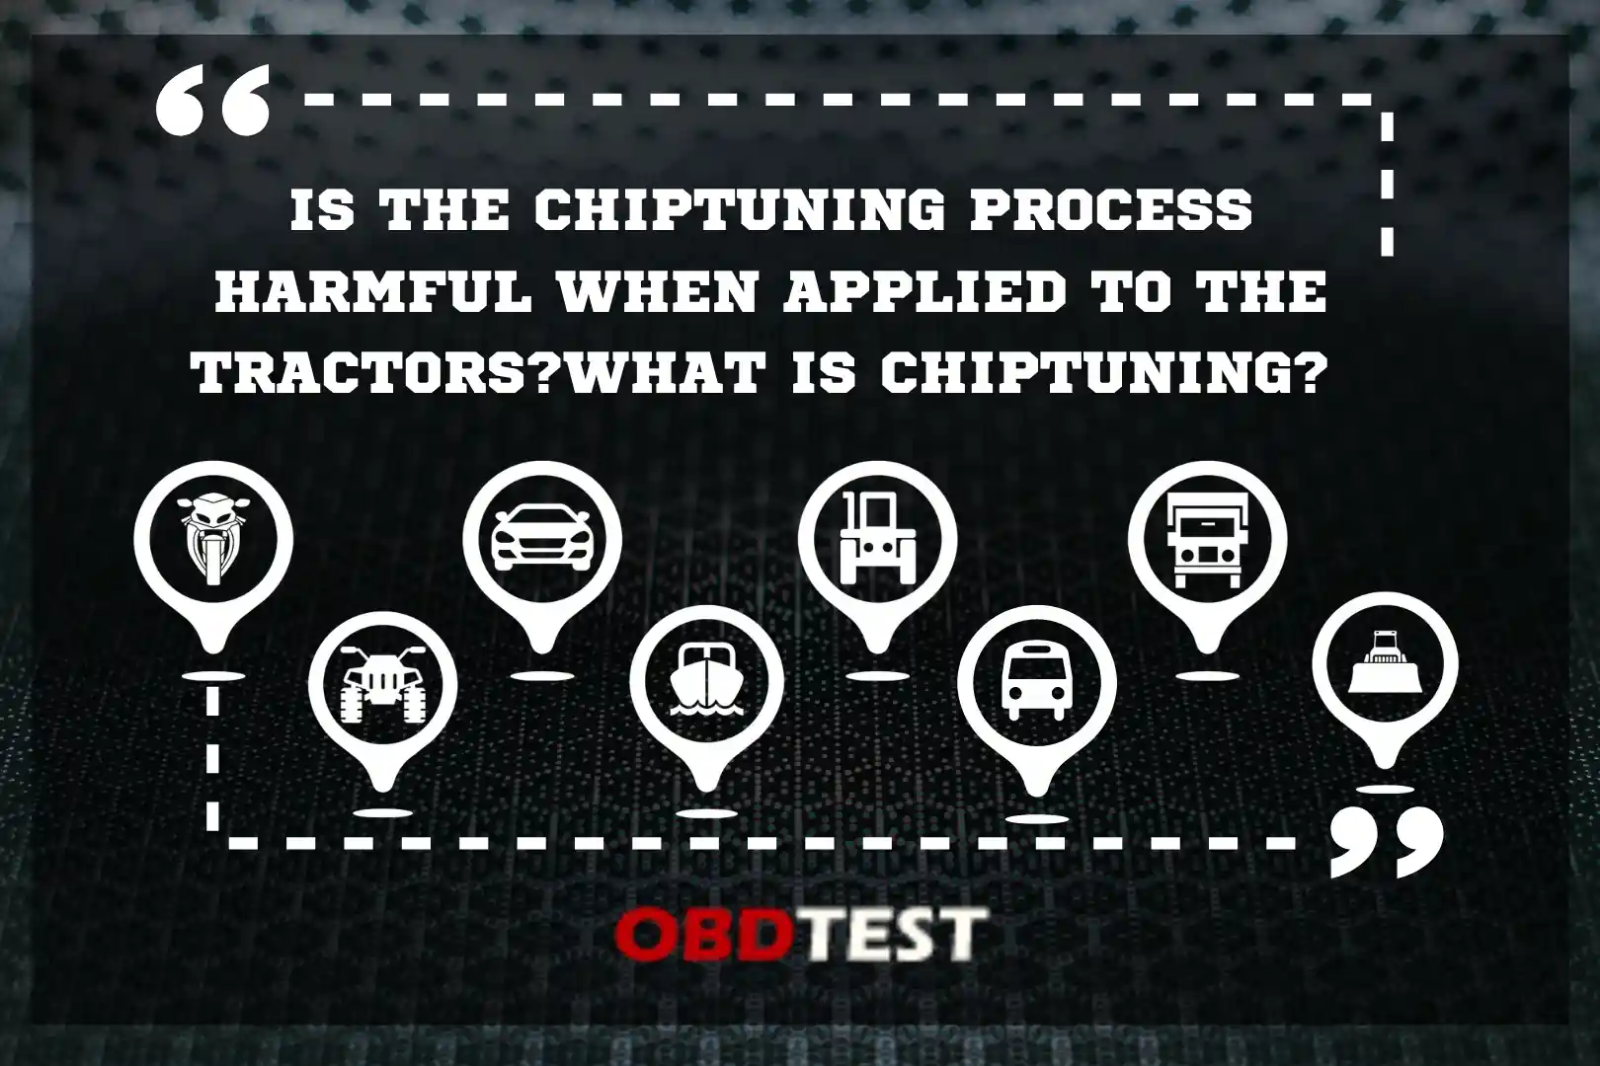 Is the chiptuning process applied to the tractors?